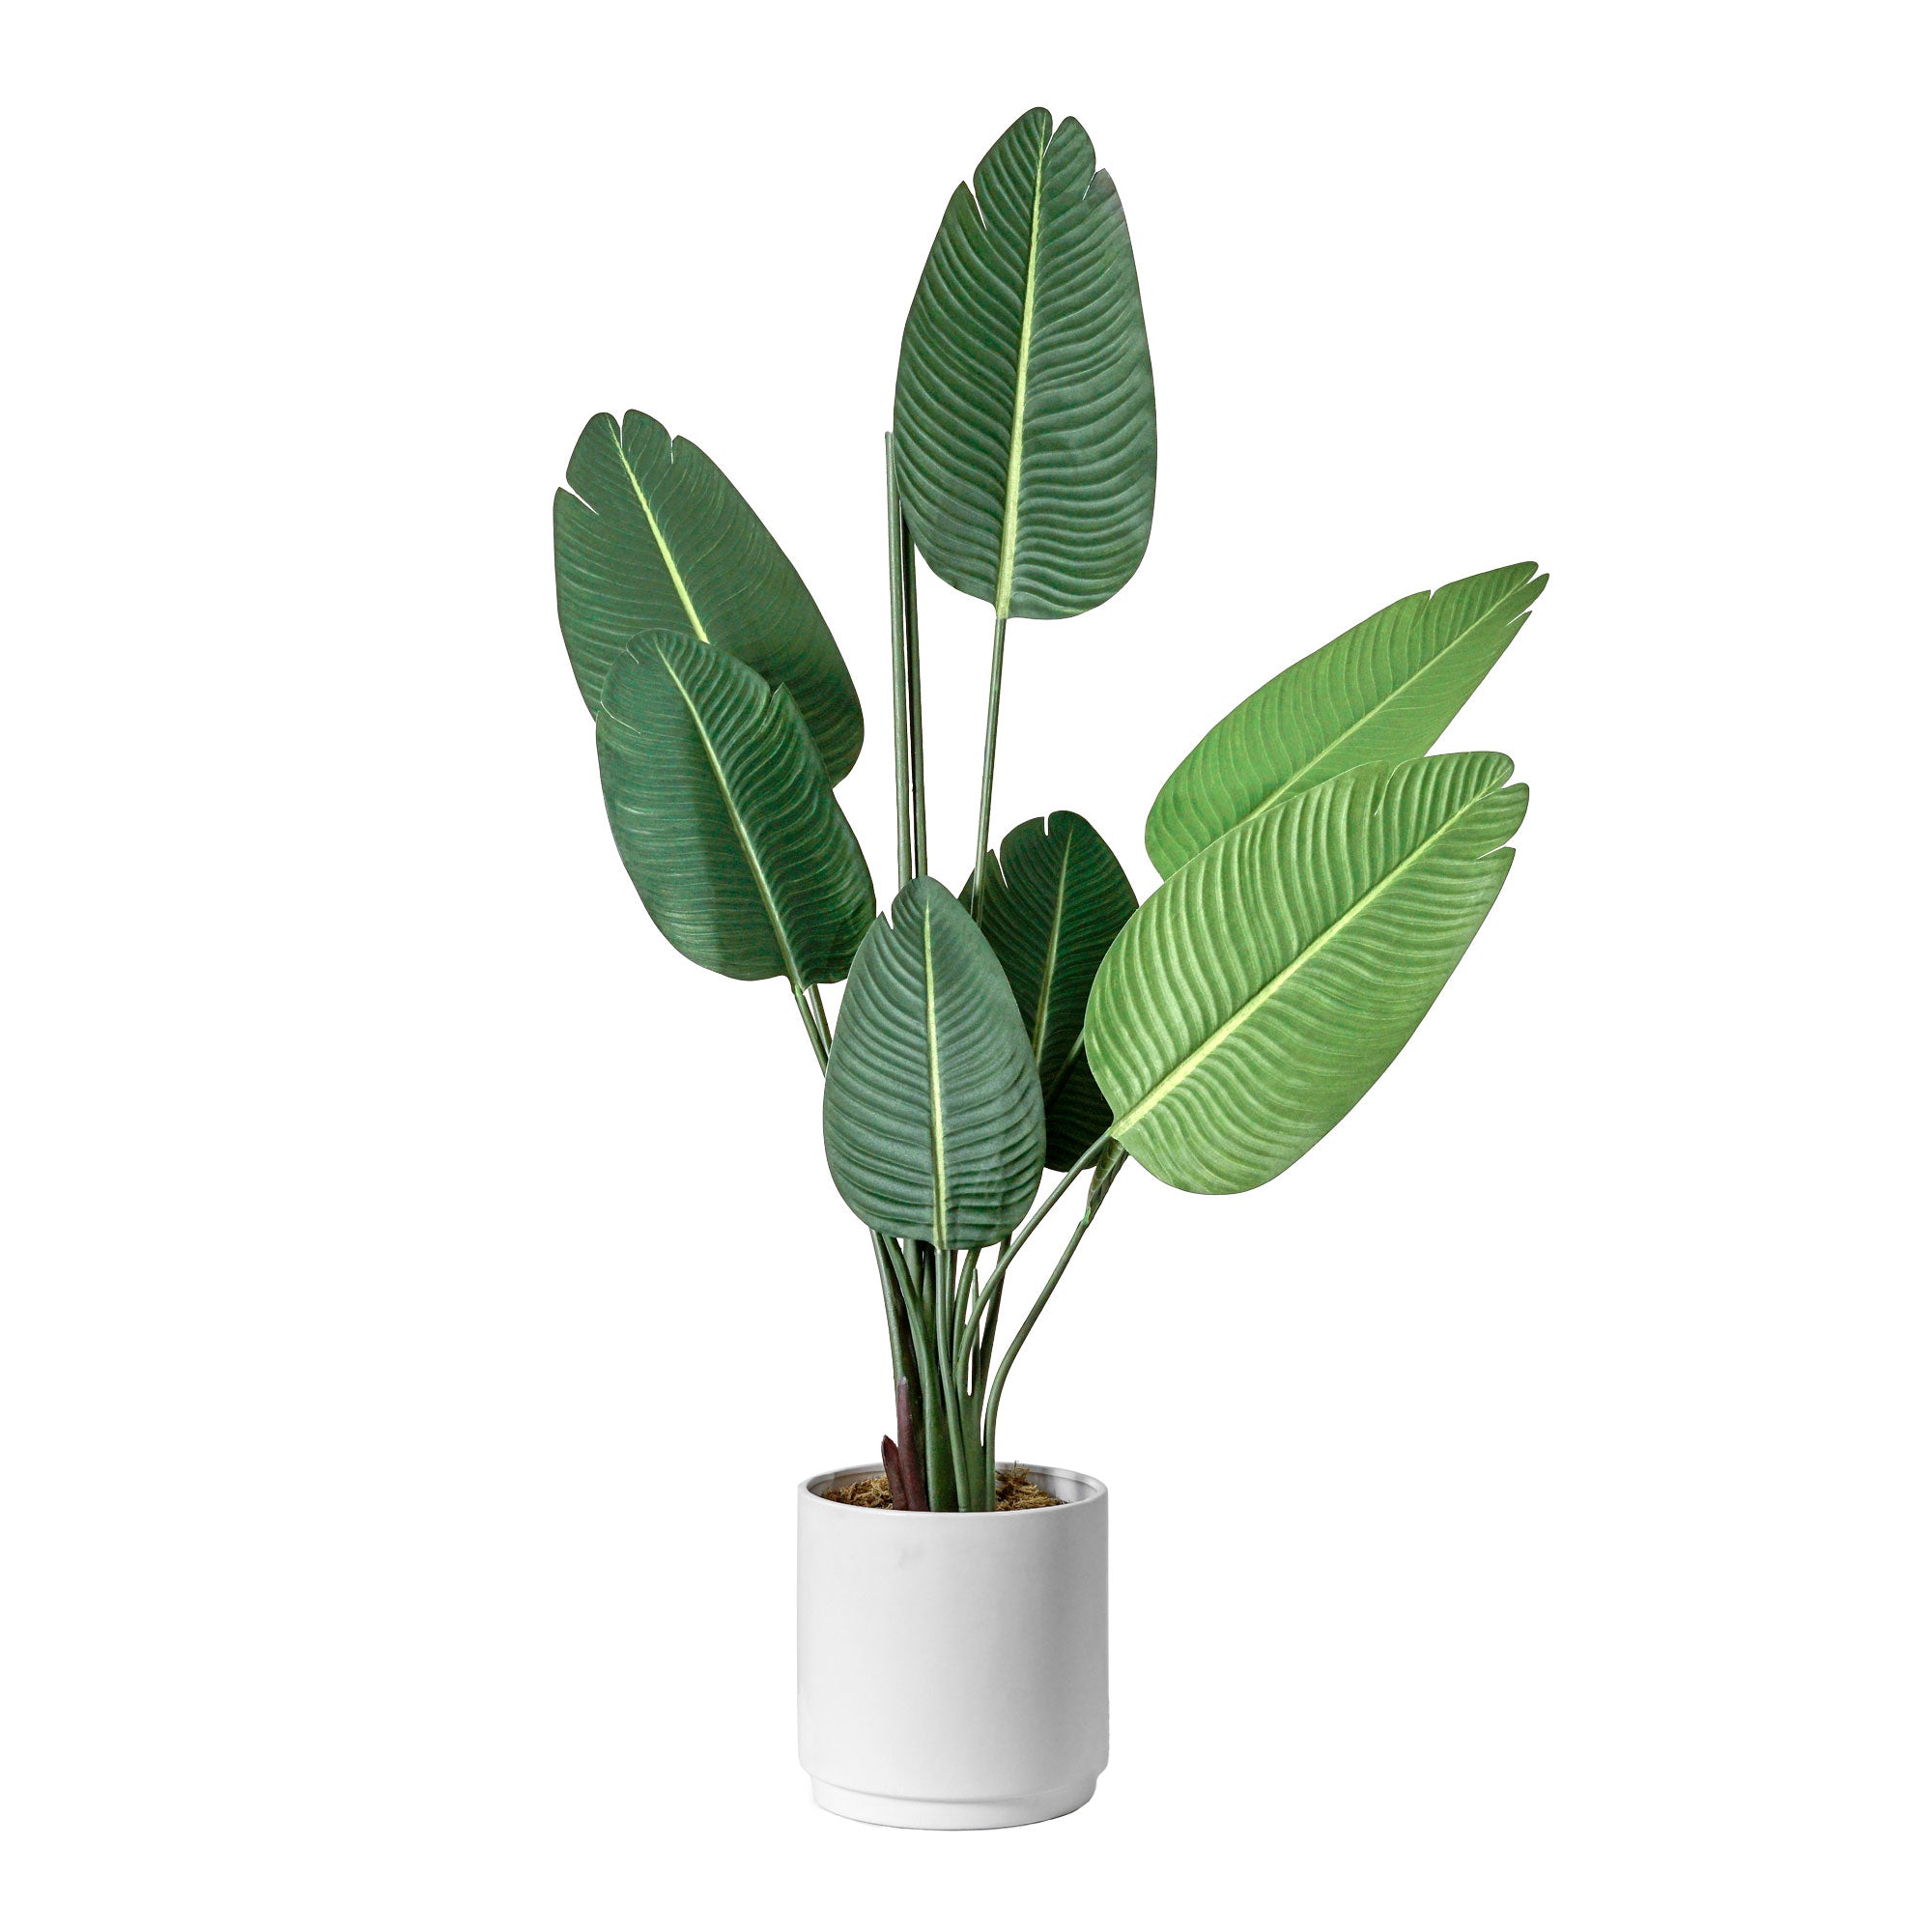 Artificial Banana Palm Tree in White Ceramic Pot with Pedestal - 60